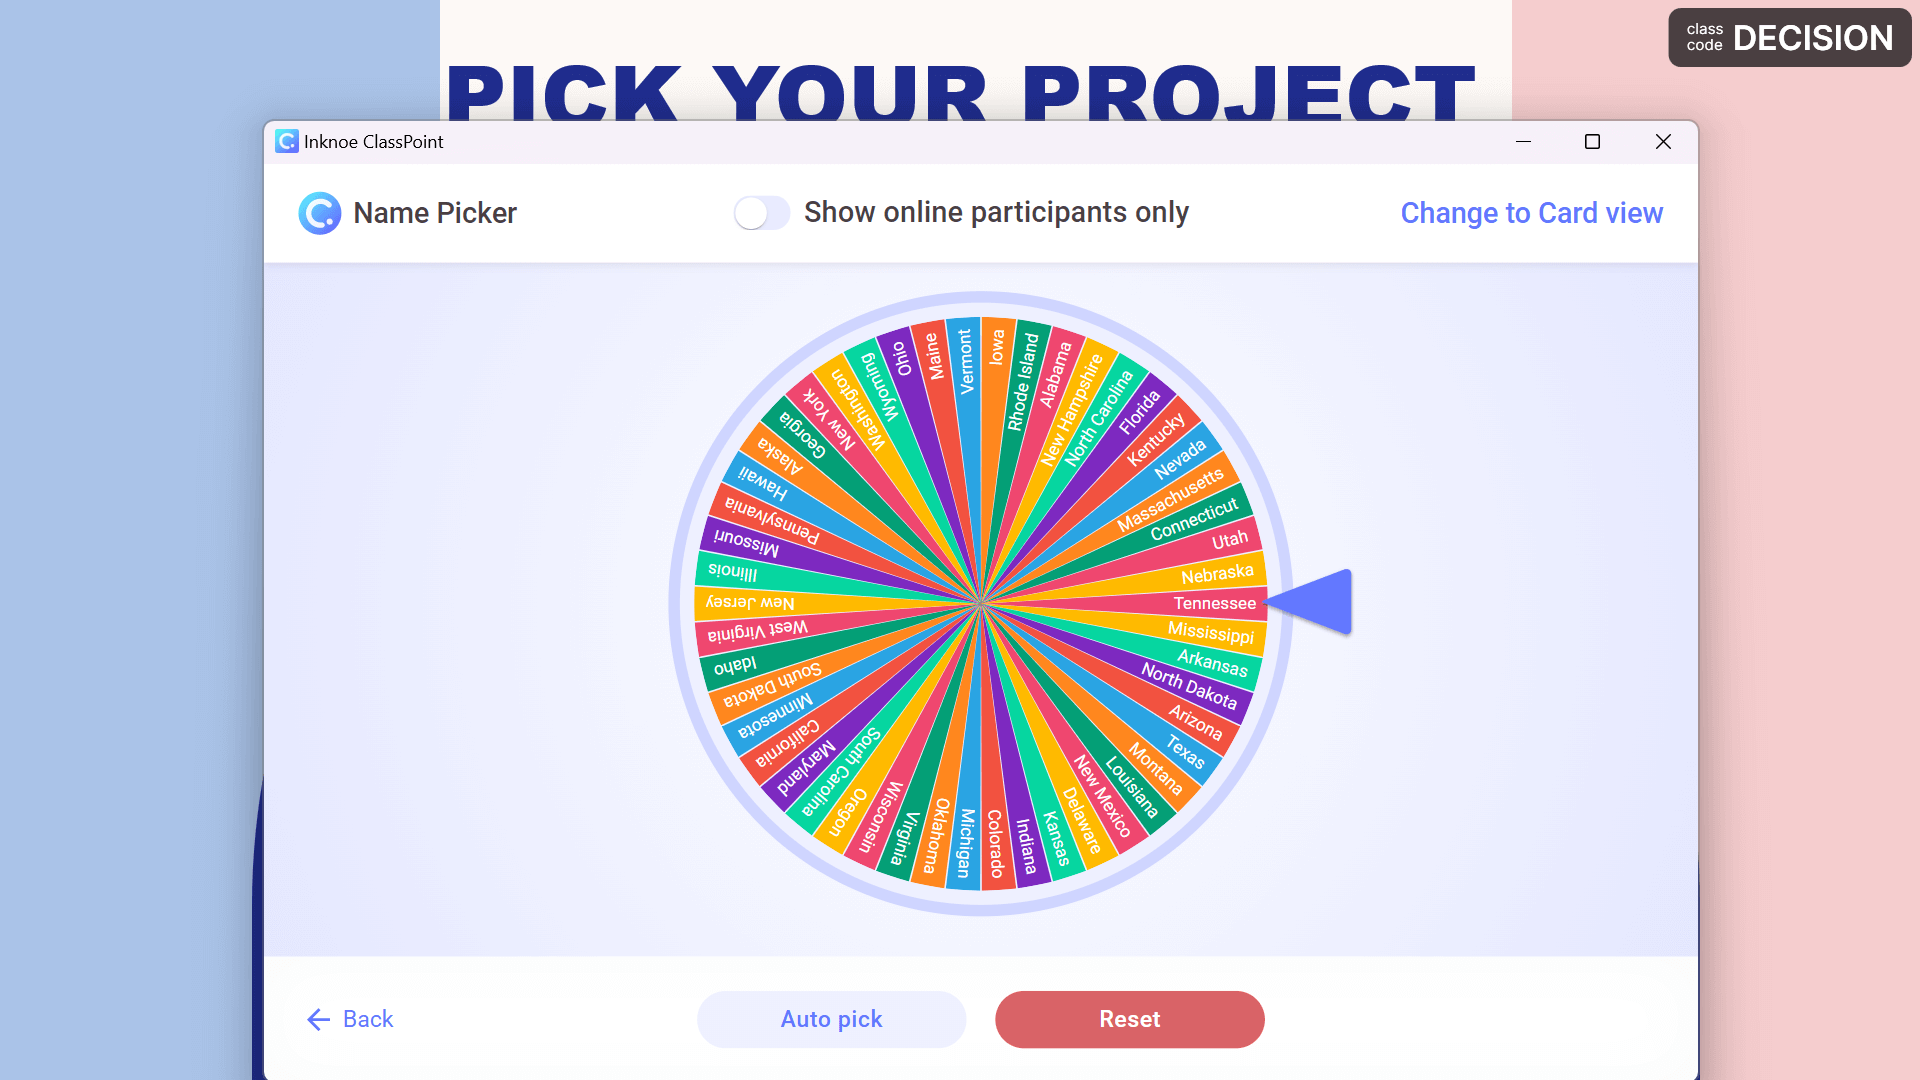 Spin the wheel! Free spinner PowerPoint template